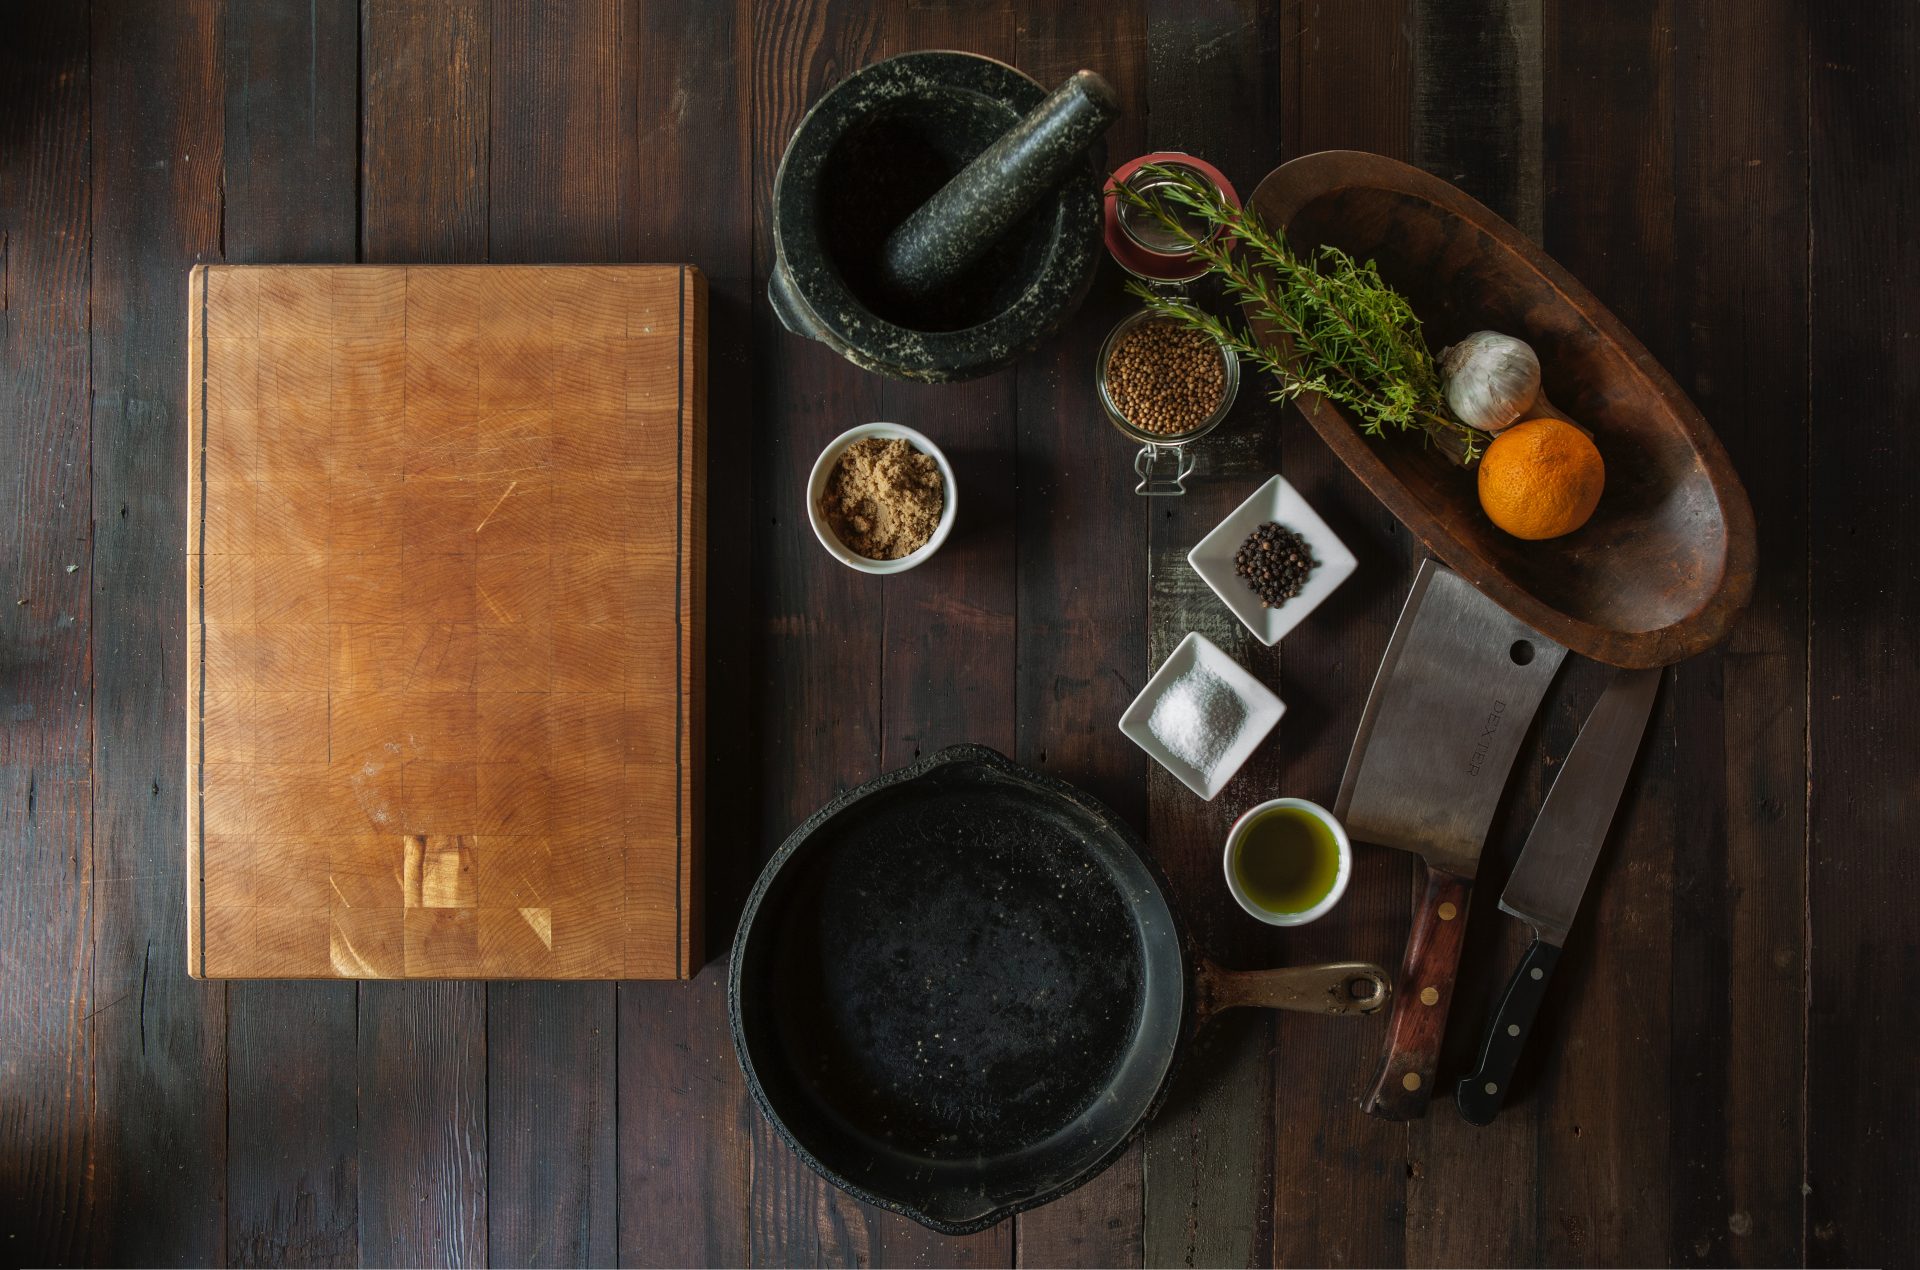 Wood vs. Plastic Cutting Board: Pros and Cons